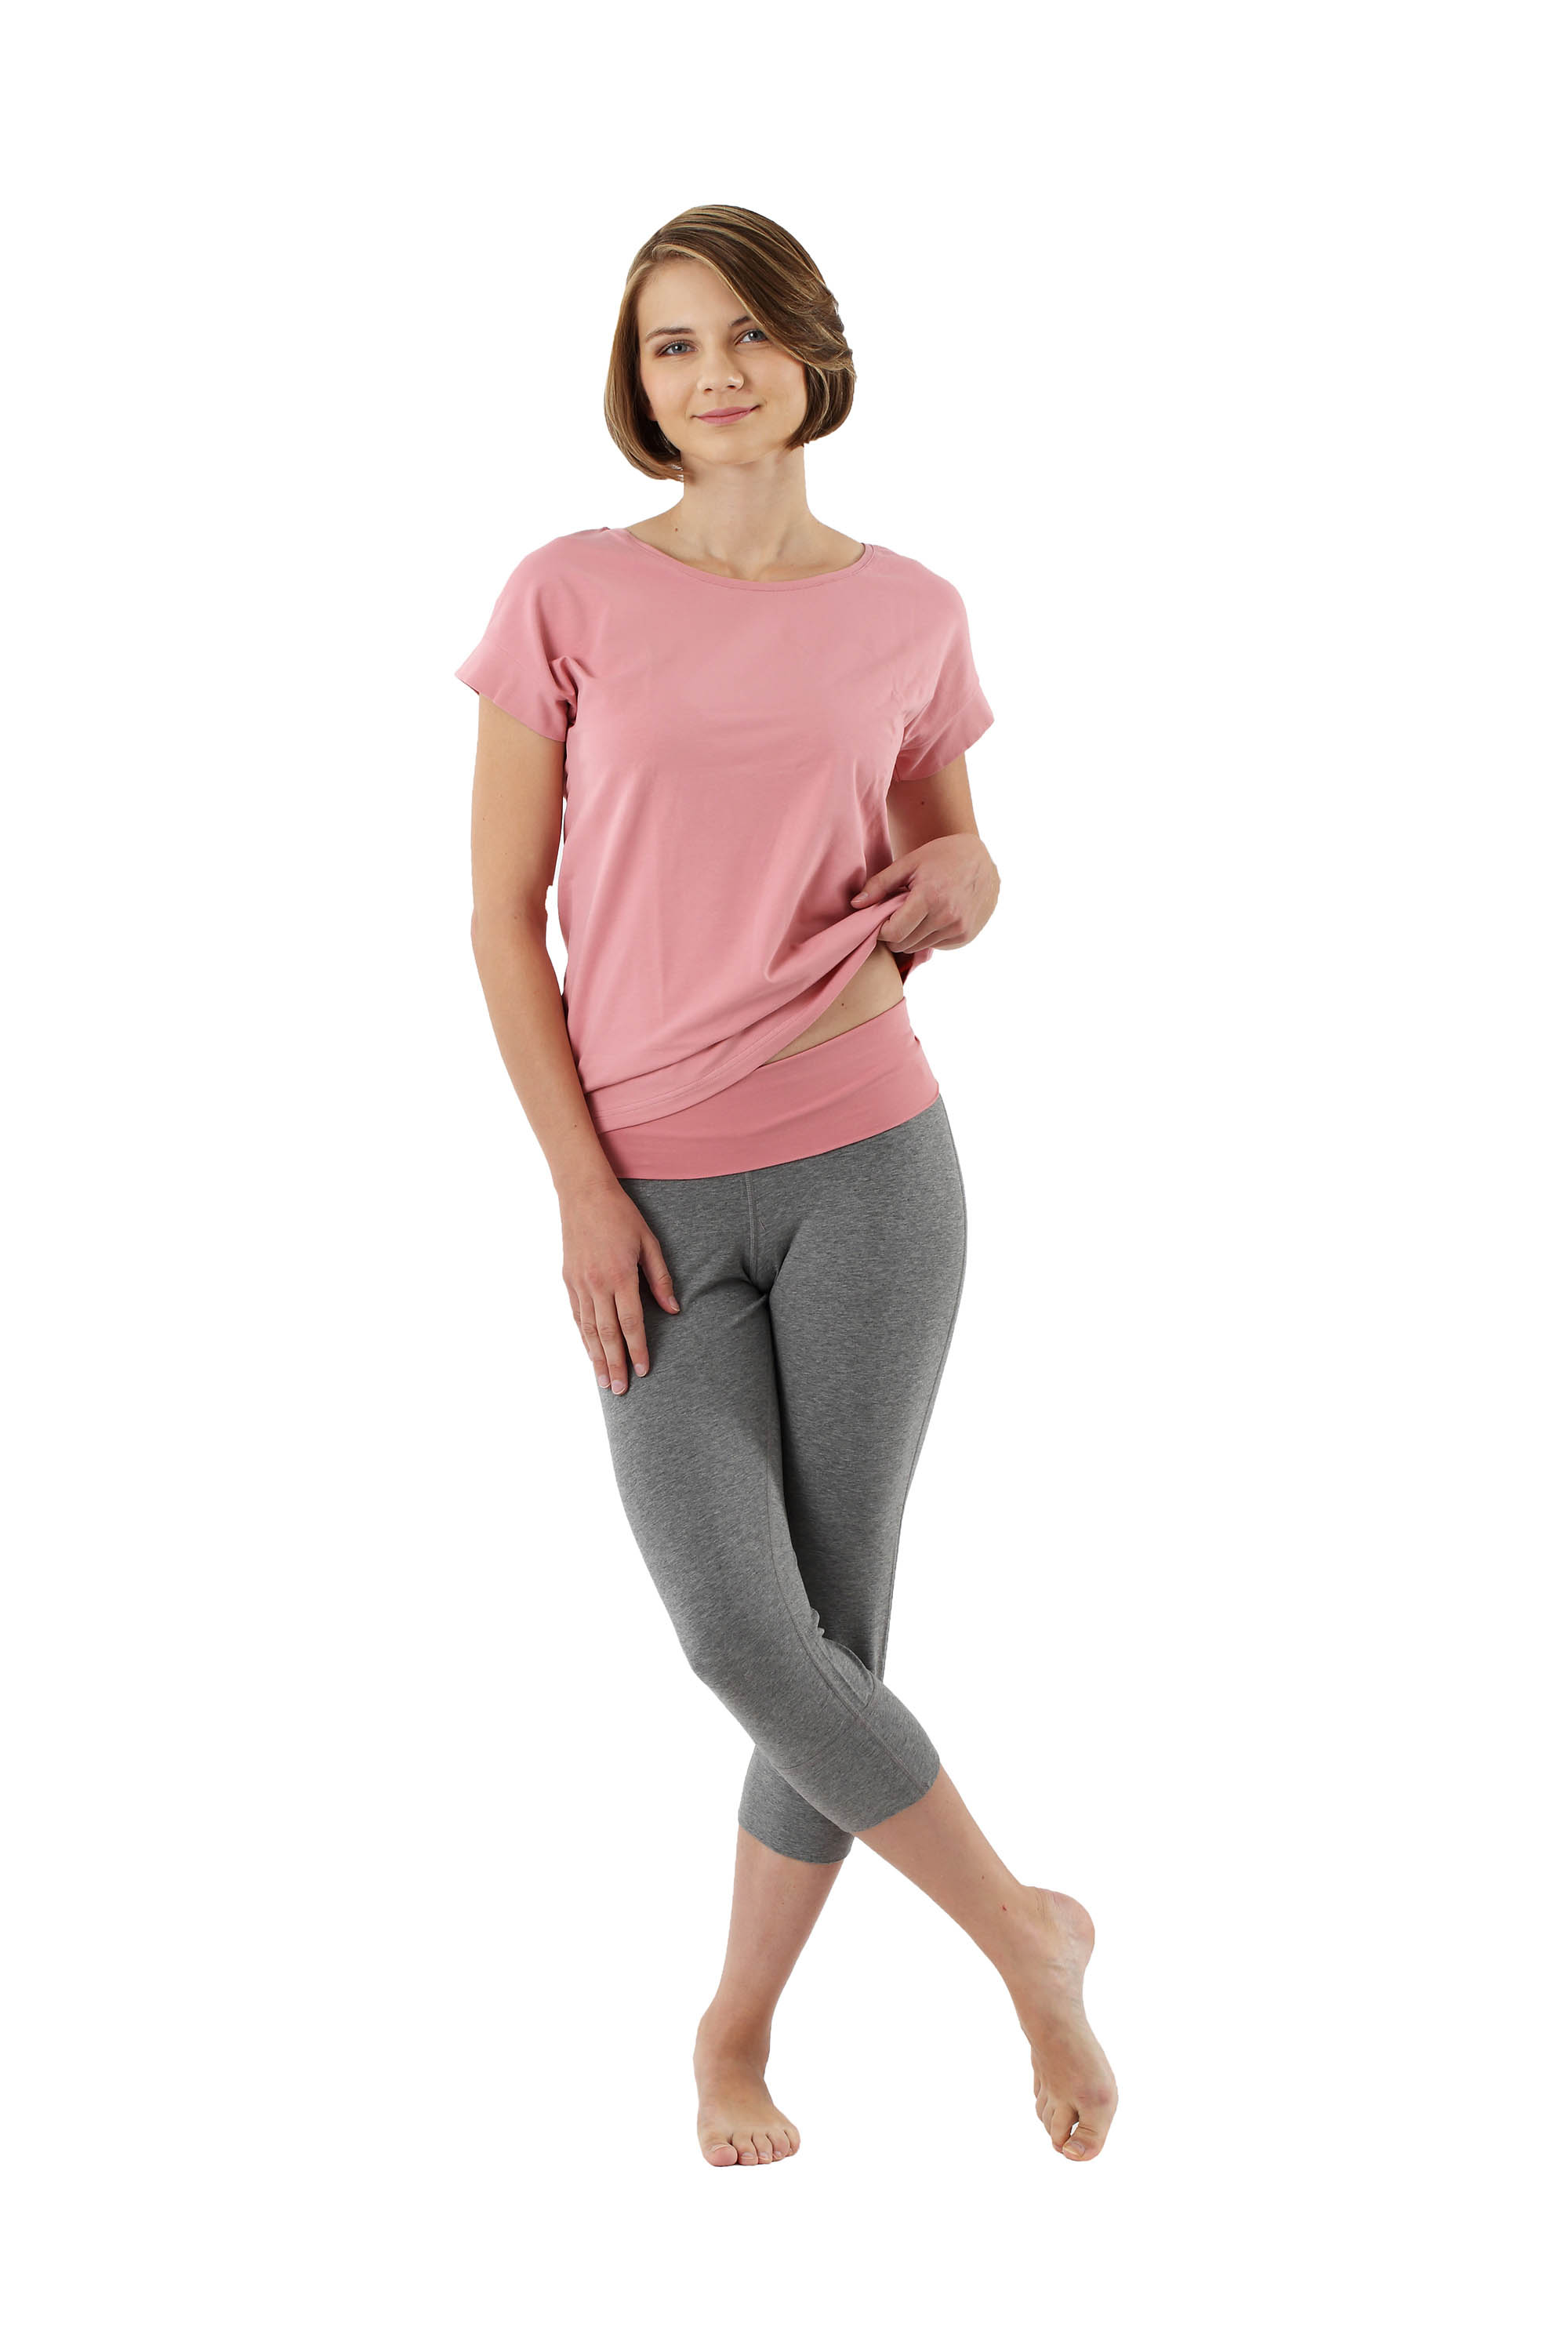 Women's pajamas with short sleeves and 3/4 pants stretch cotton, pink-gray